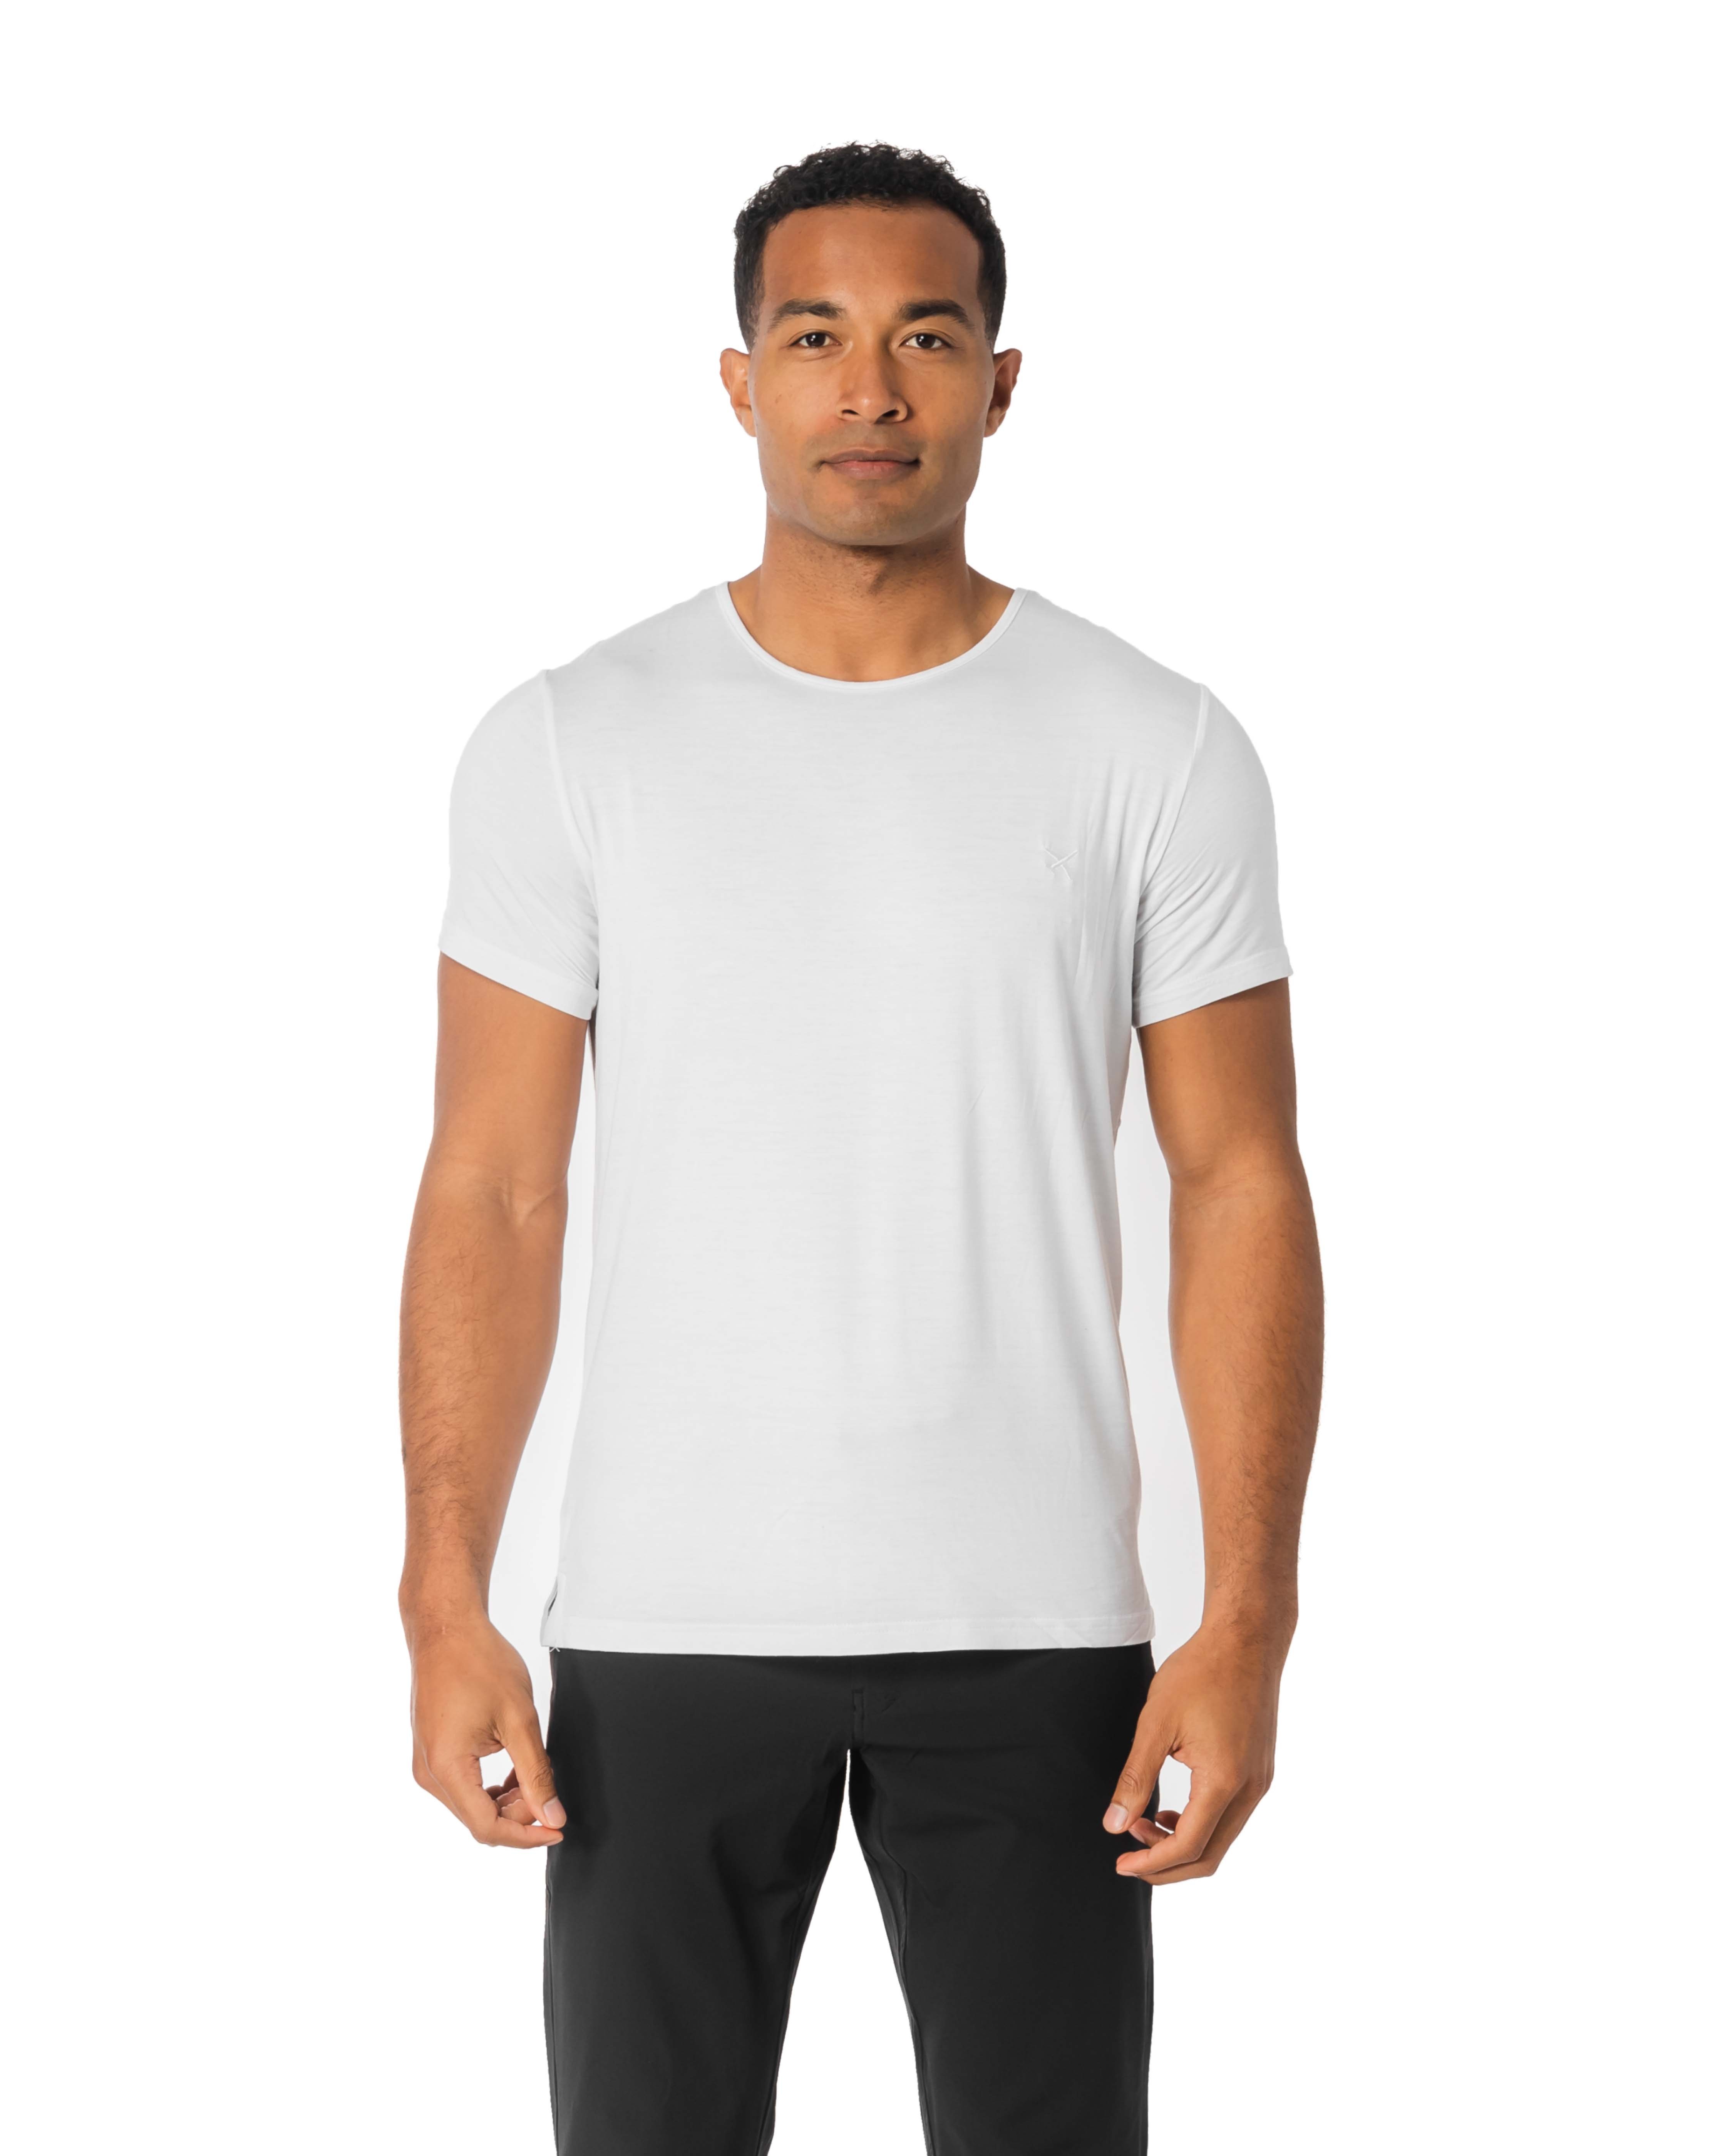 Kingsted Black T-Shirts for Men - Royally Comfortable - Super Soft